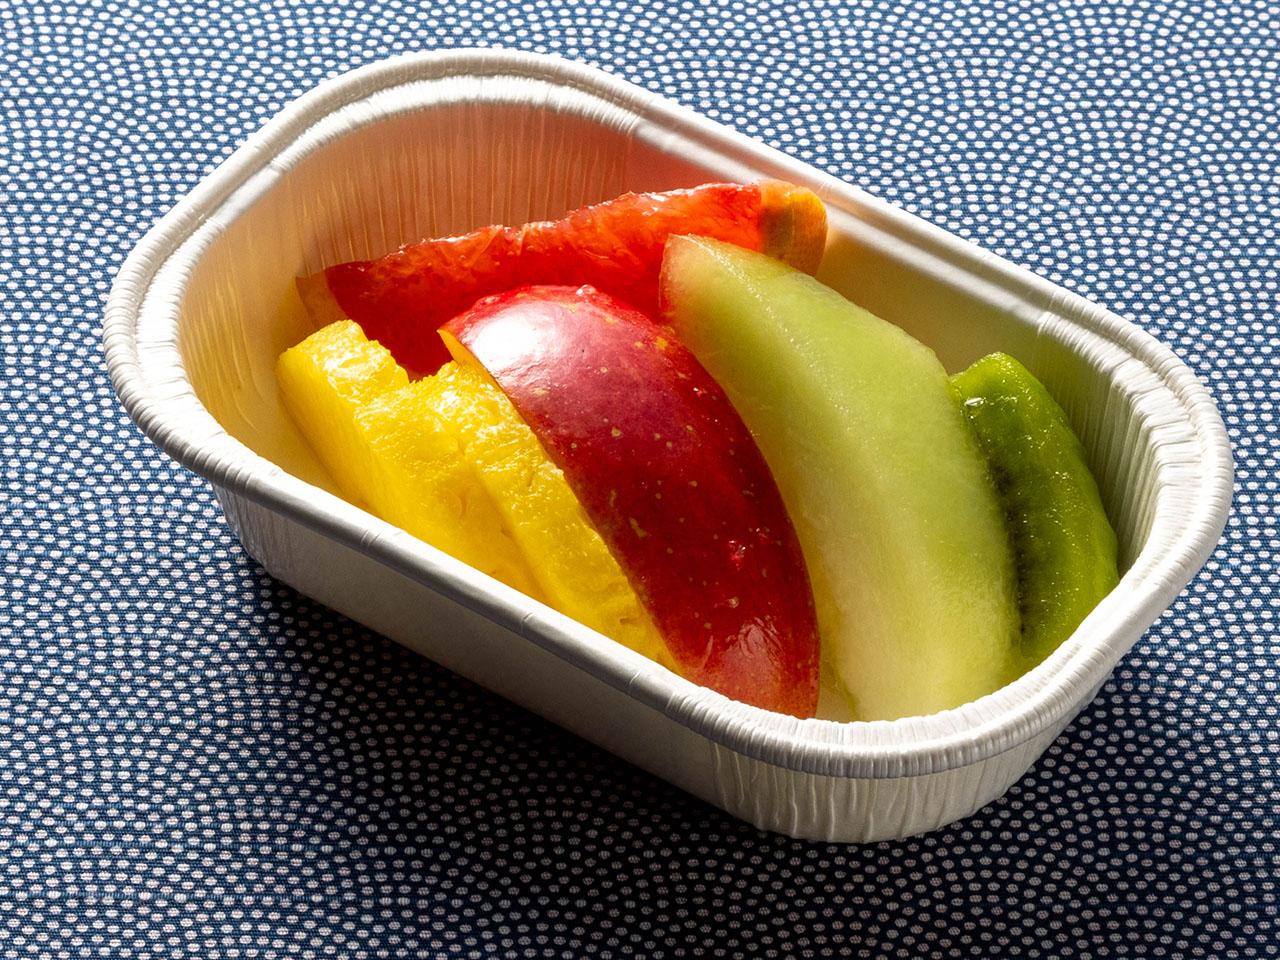 Photograph of in-flight meal Fresh Fruits